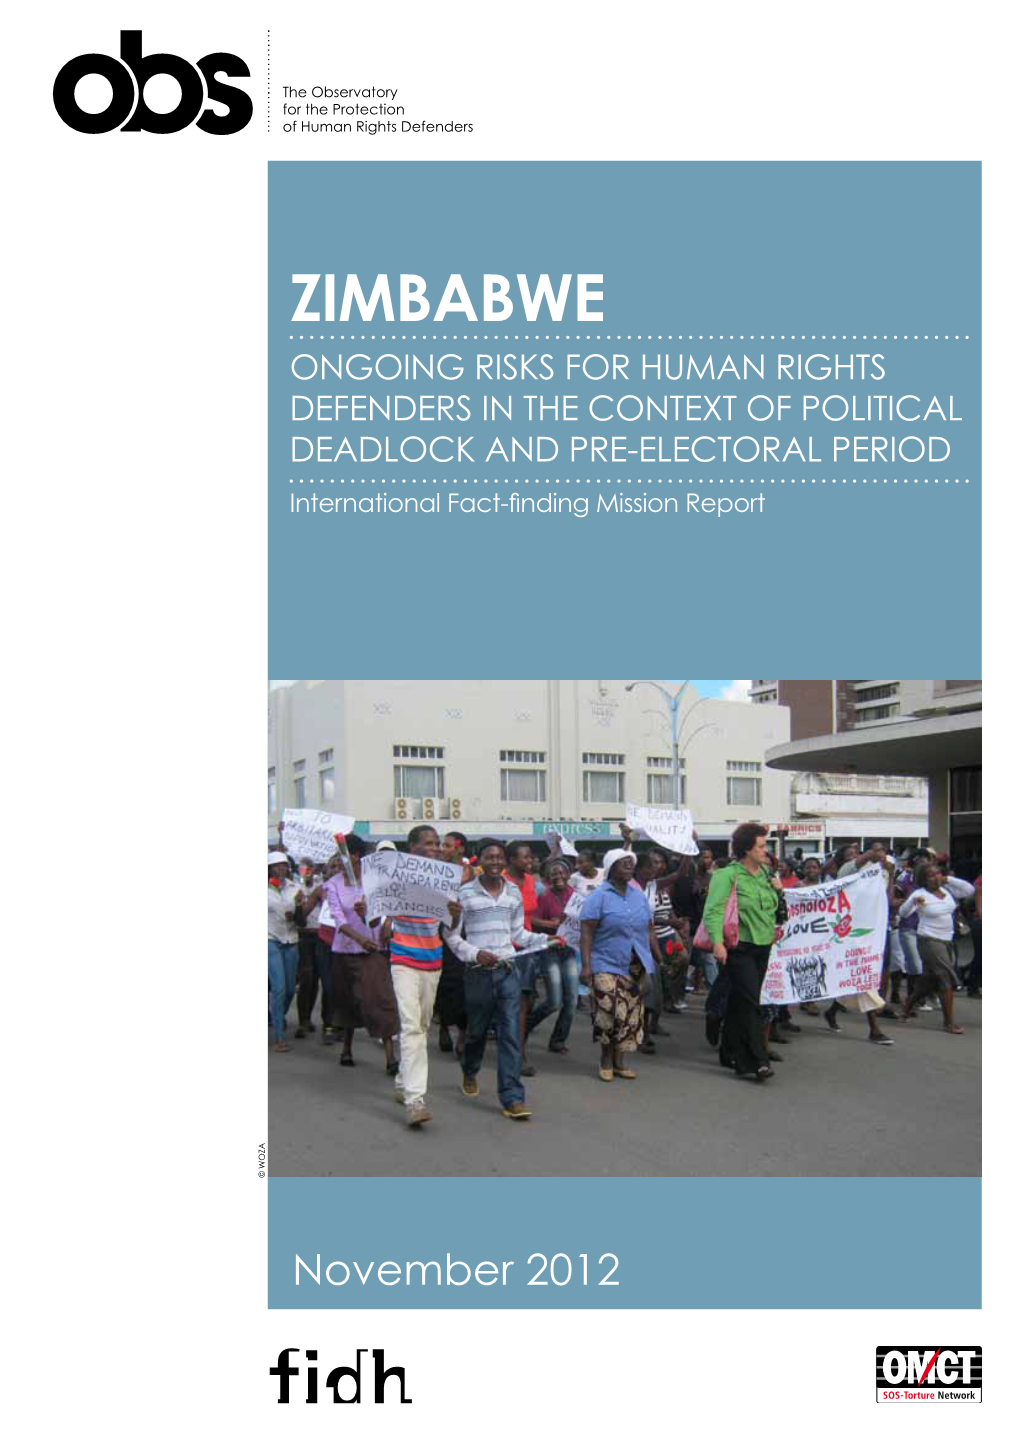 ZIMBABWE Ongoing Risks for Human Rights Defenders in the Context of Political Deadlock and Pre-Electoral Period ���������������������������������������� a © WOZ